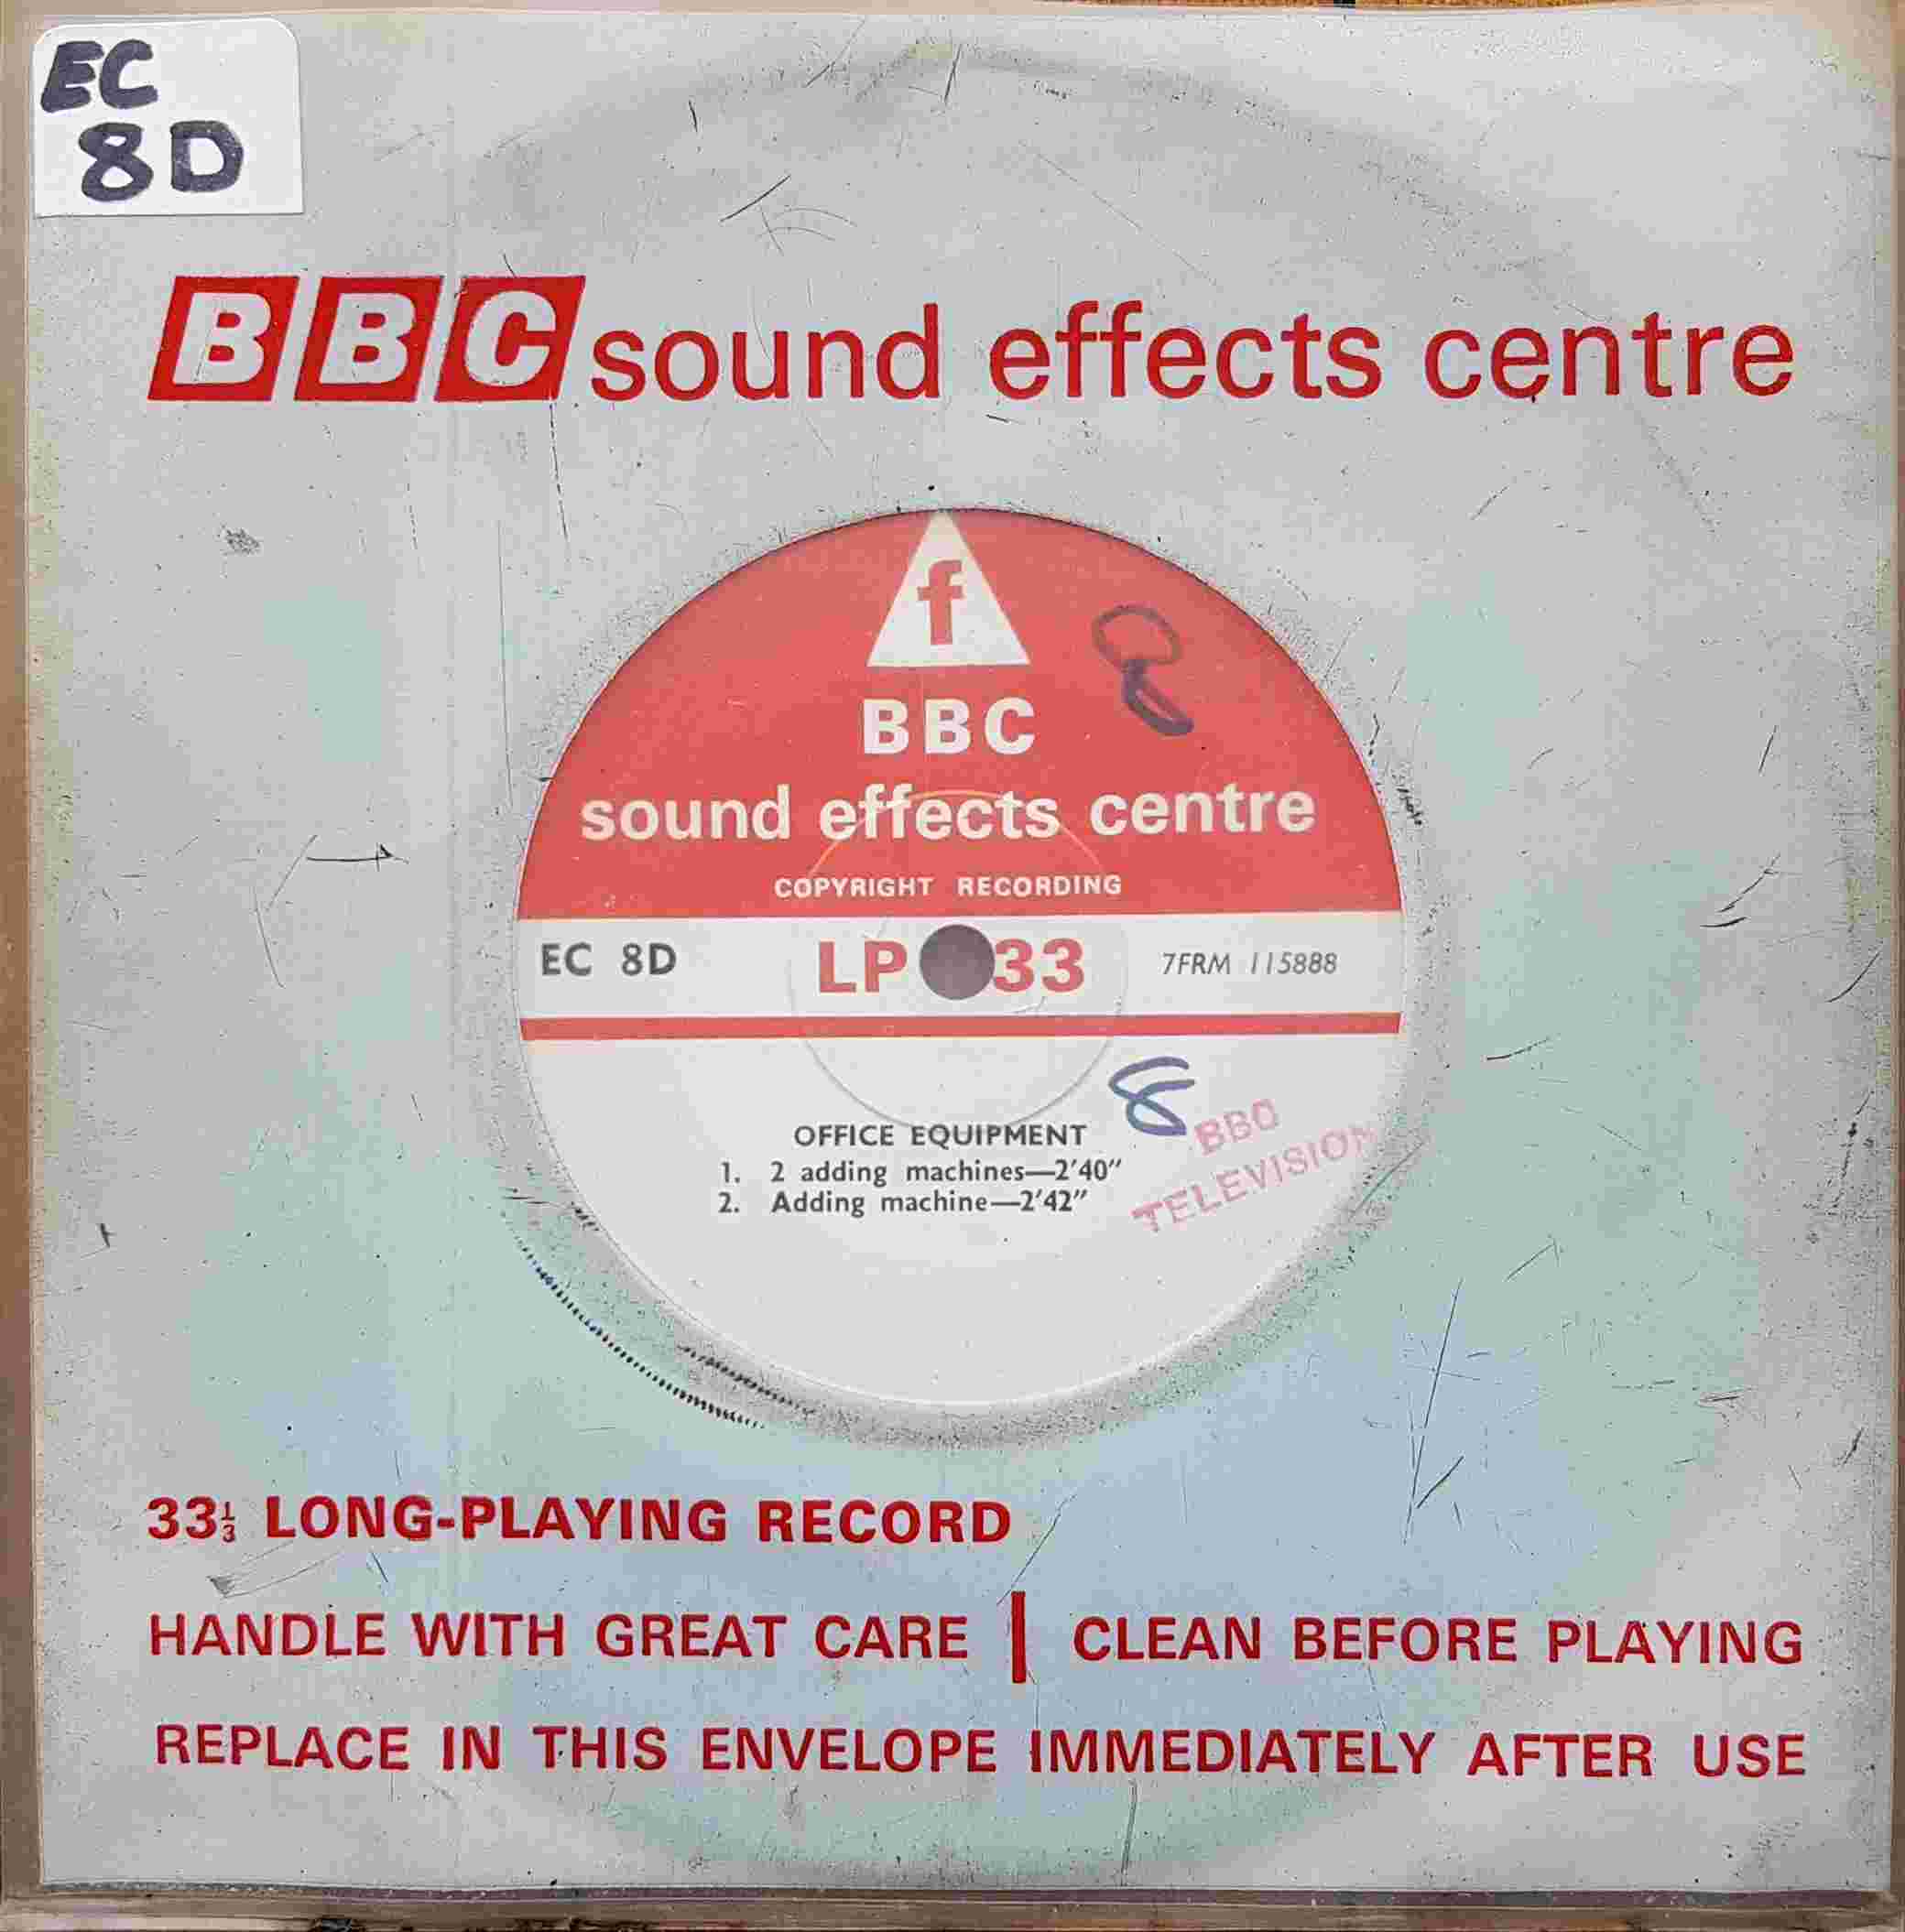 Picture of EC 8D Office equipment by artist Not registered from the BBC singles - Records and Tapes library